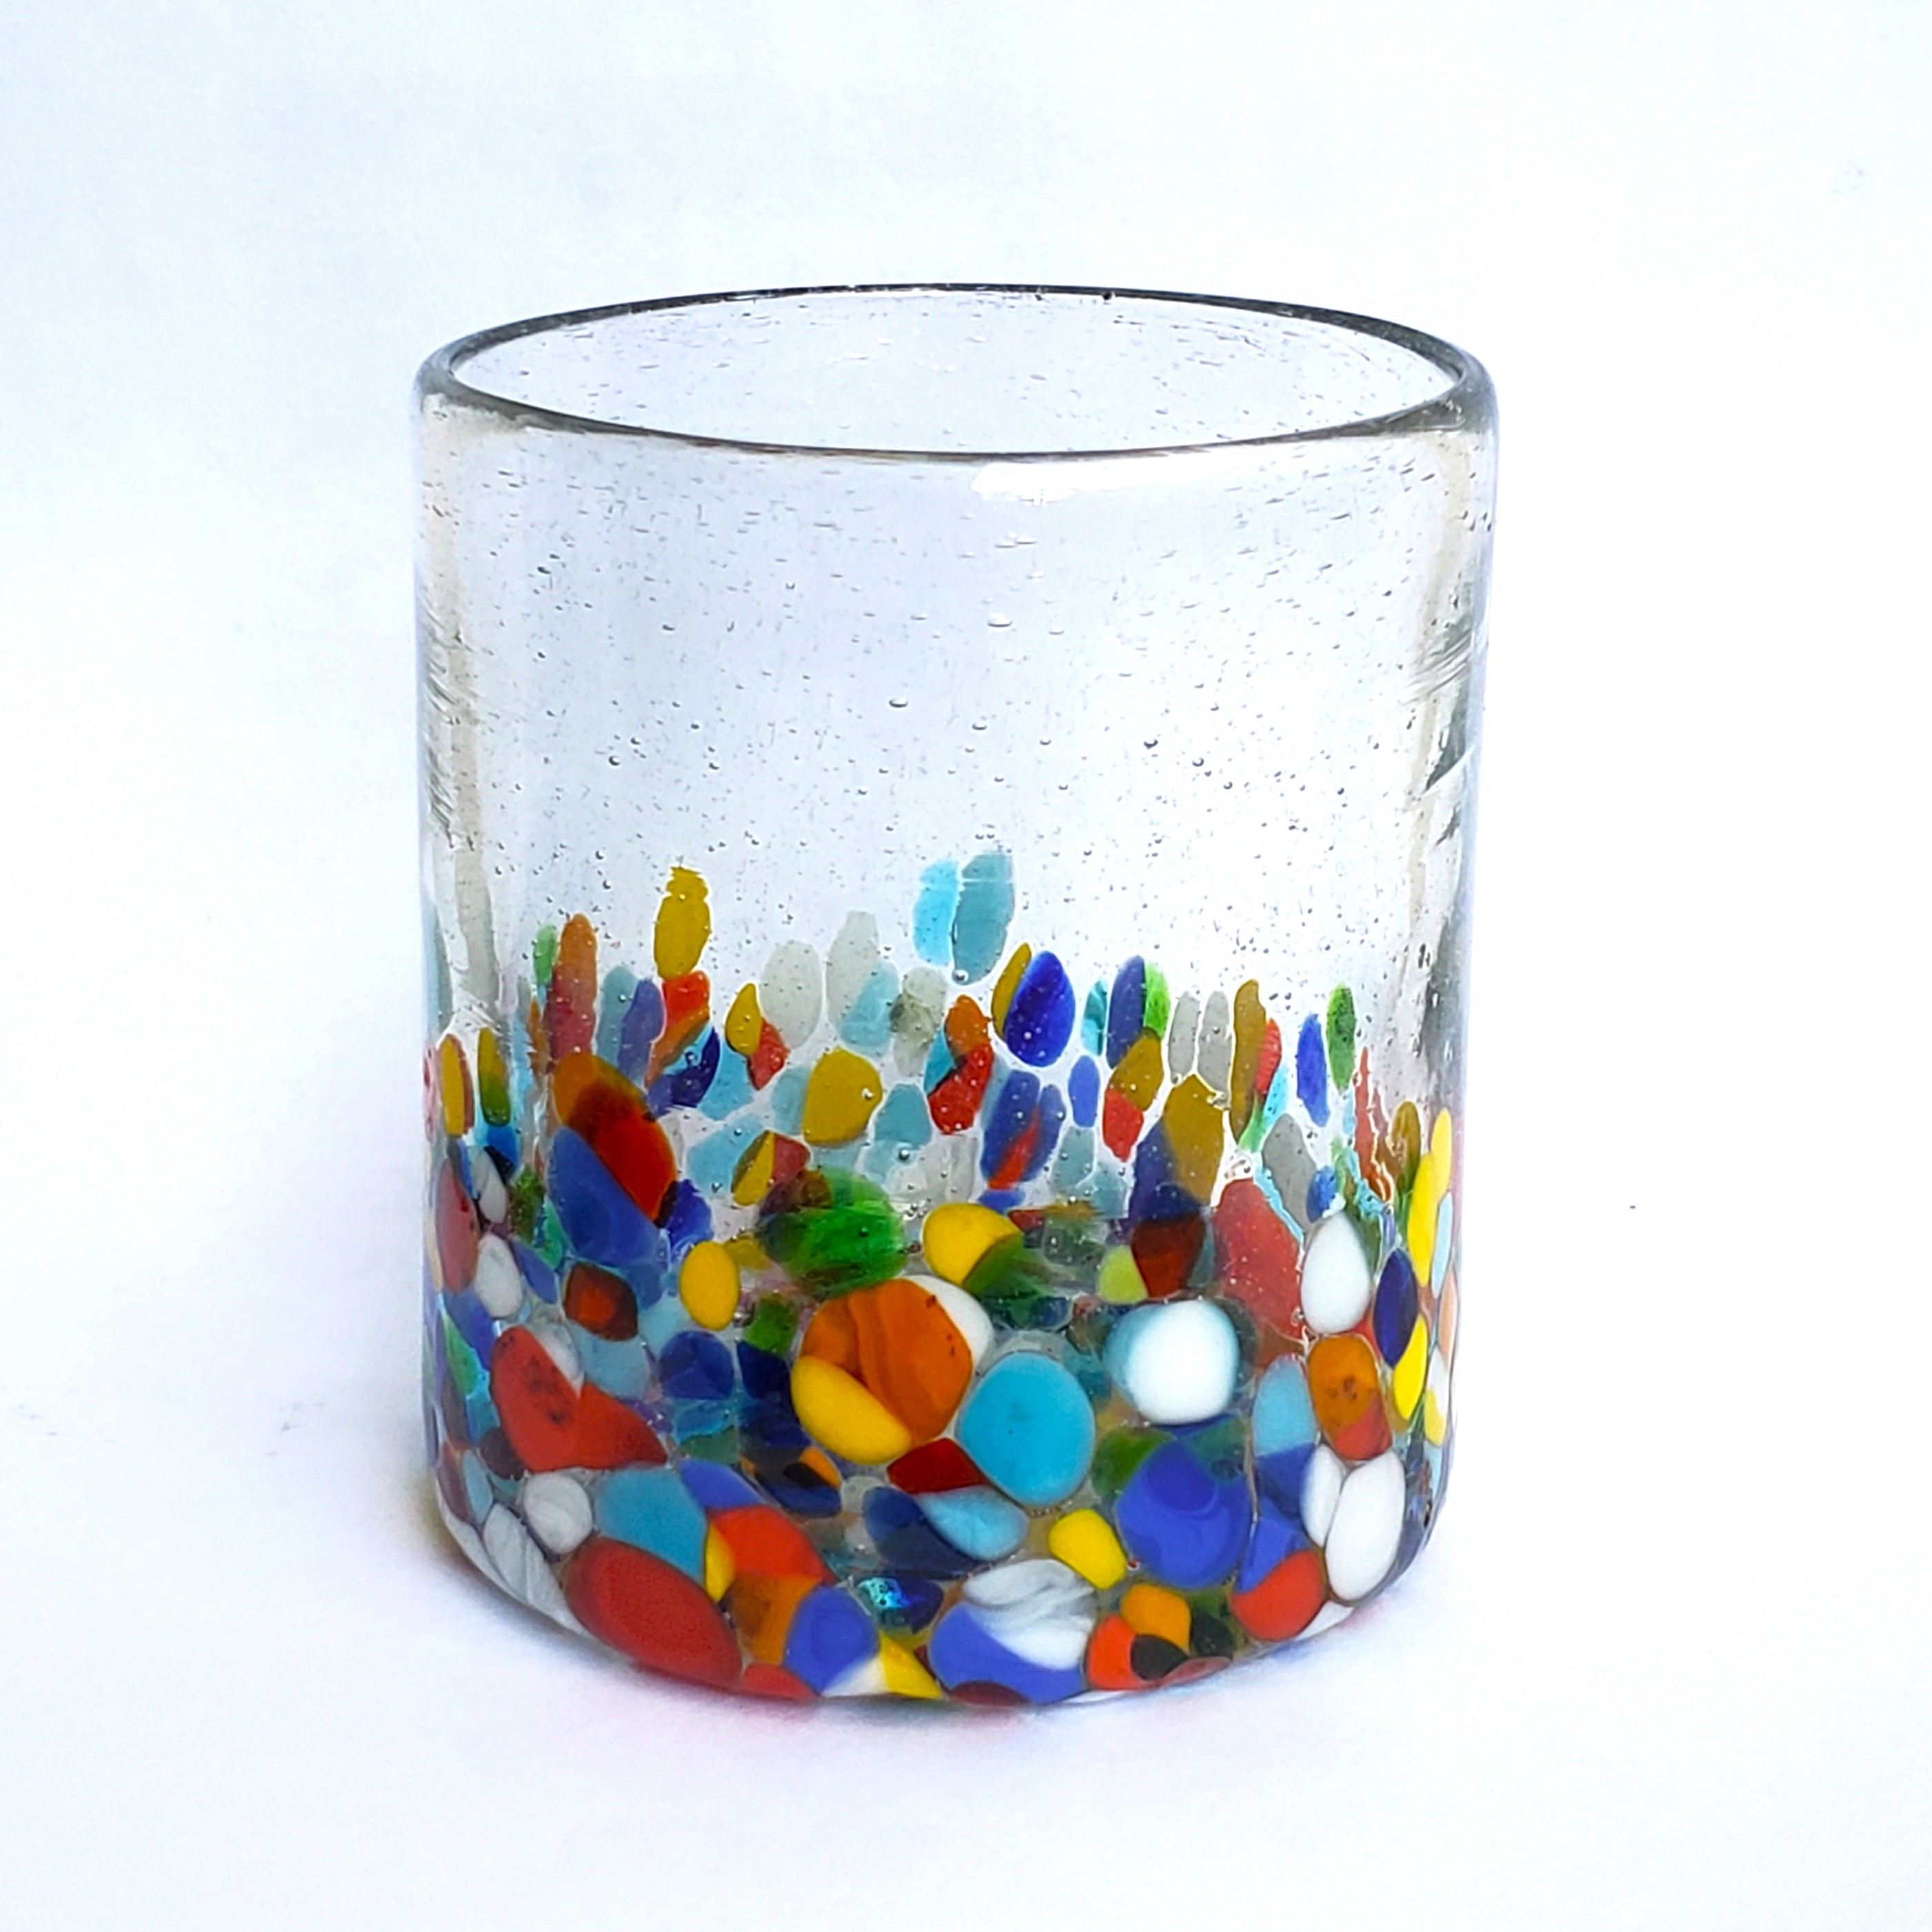 Novedades / Clear & Confetti 9 oz Short Tumblers (set of 6) / Our Clear & Confetti Glassware combines the best of two worlds: clear, thick, sturdy handcrafted glass on top, meets the colorful, festive, confetti bottom! These glasses will sure be a standout in any table setting or as a fabulous gift for your loved ones. Crafted one by one by skilled artisans in Tonala, Mexico, each glass is different from the next making them unique works of art. You'll be amazed at how they make having a simple glass of water a happier experience. Made from eco-friendly recycled glass.